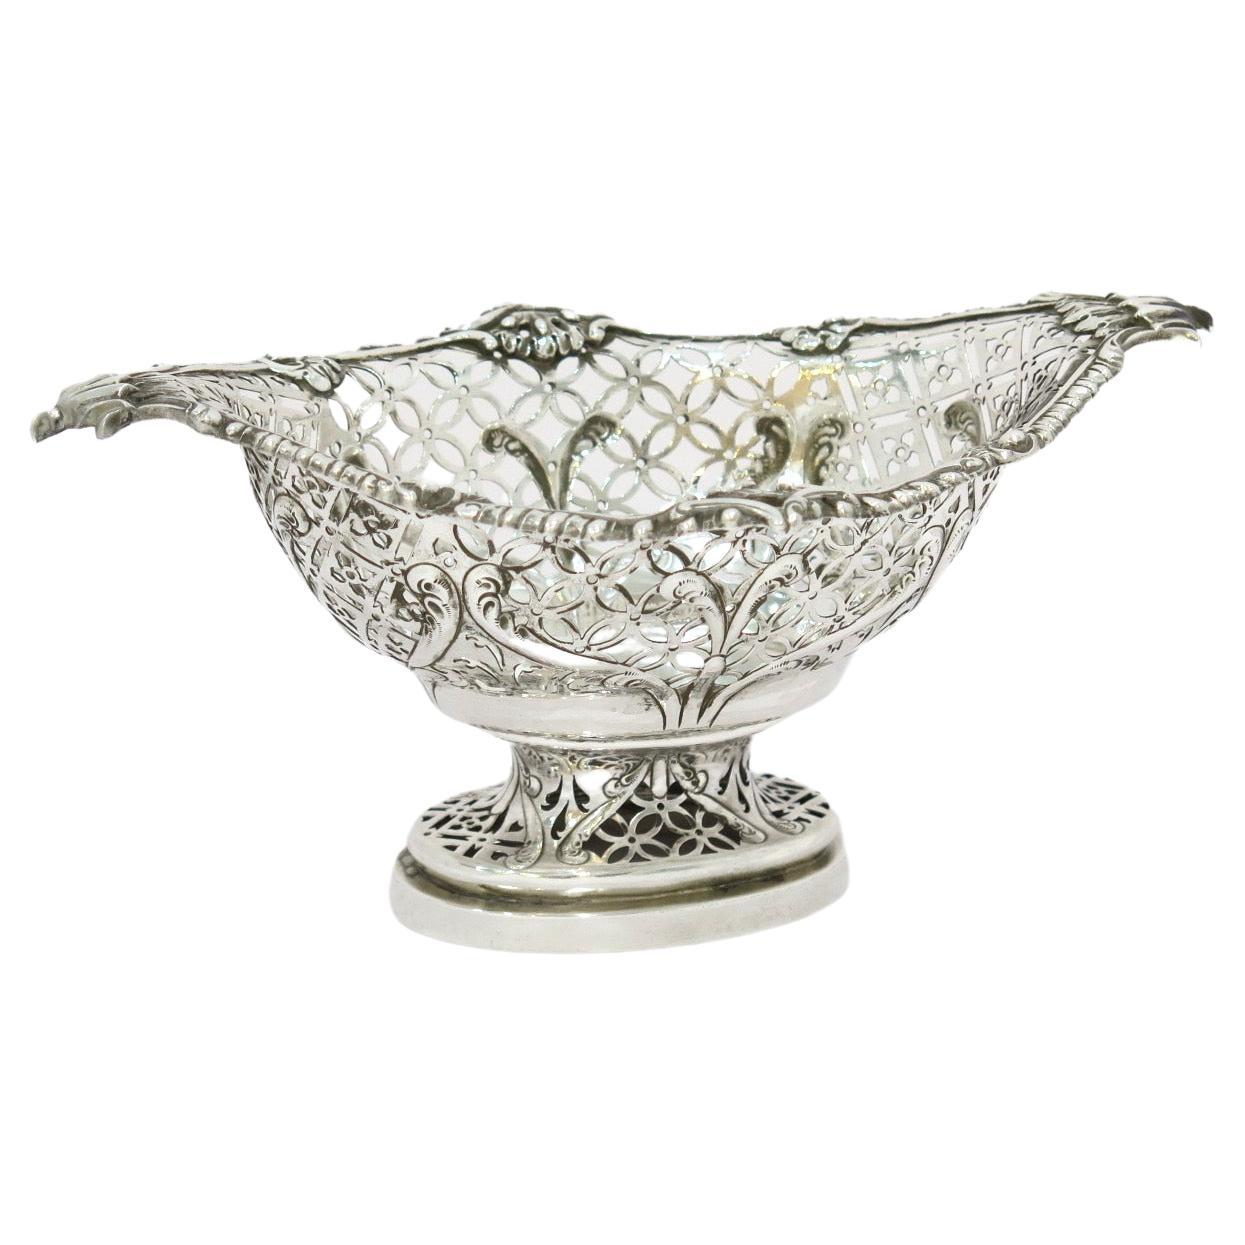 Sterling Silver Antique English Floral Pattern Footed Candy Nut Basket